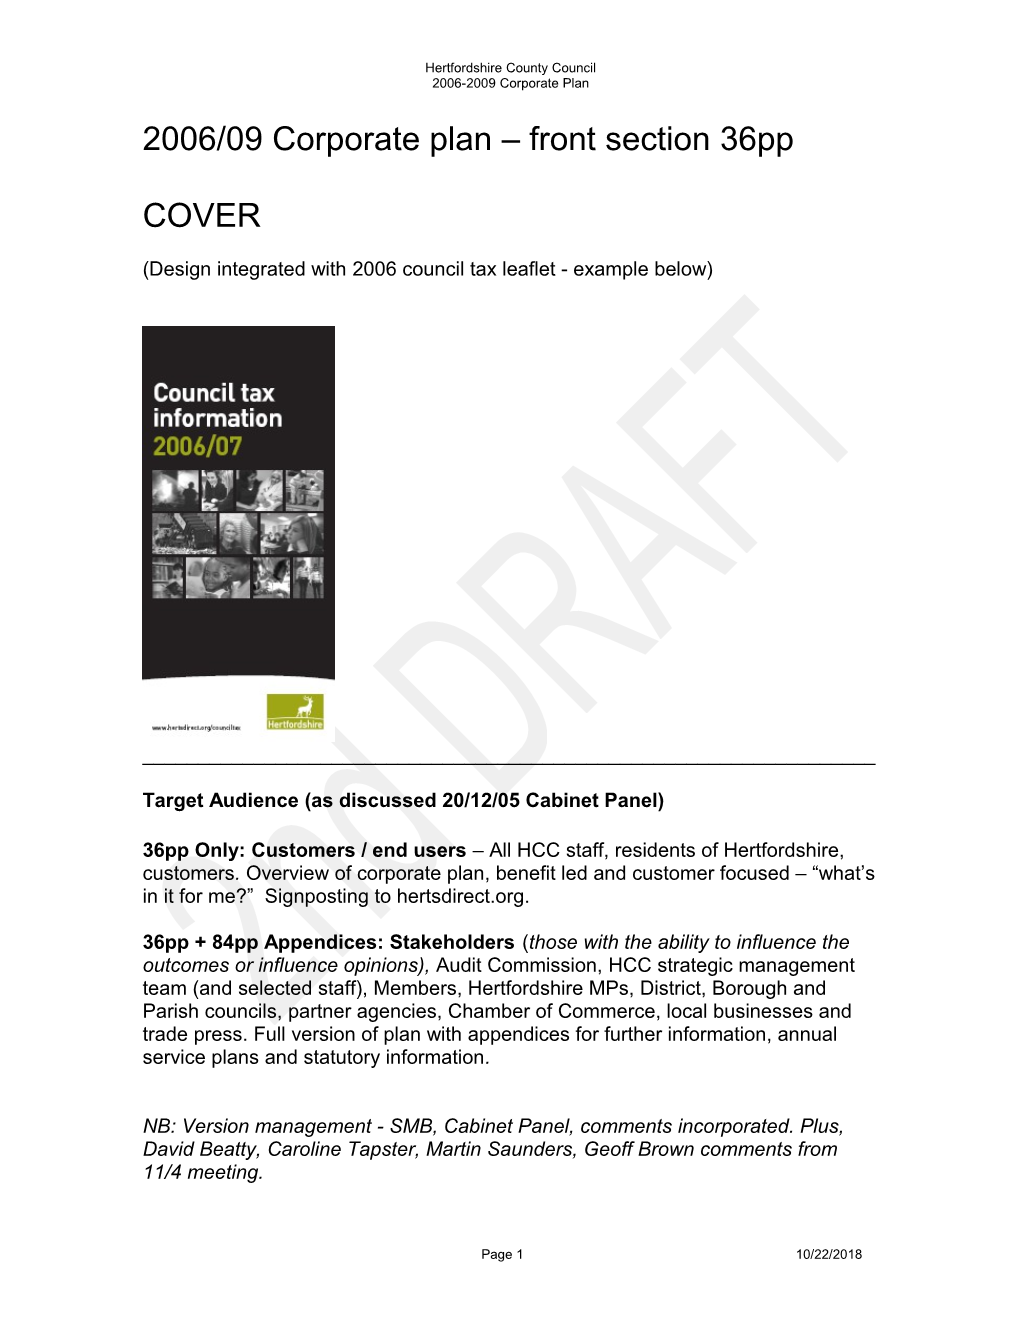 2006/09 Corporate Plan Front Section 36Pp